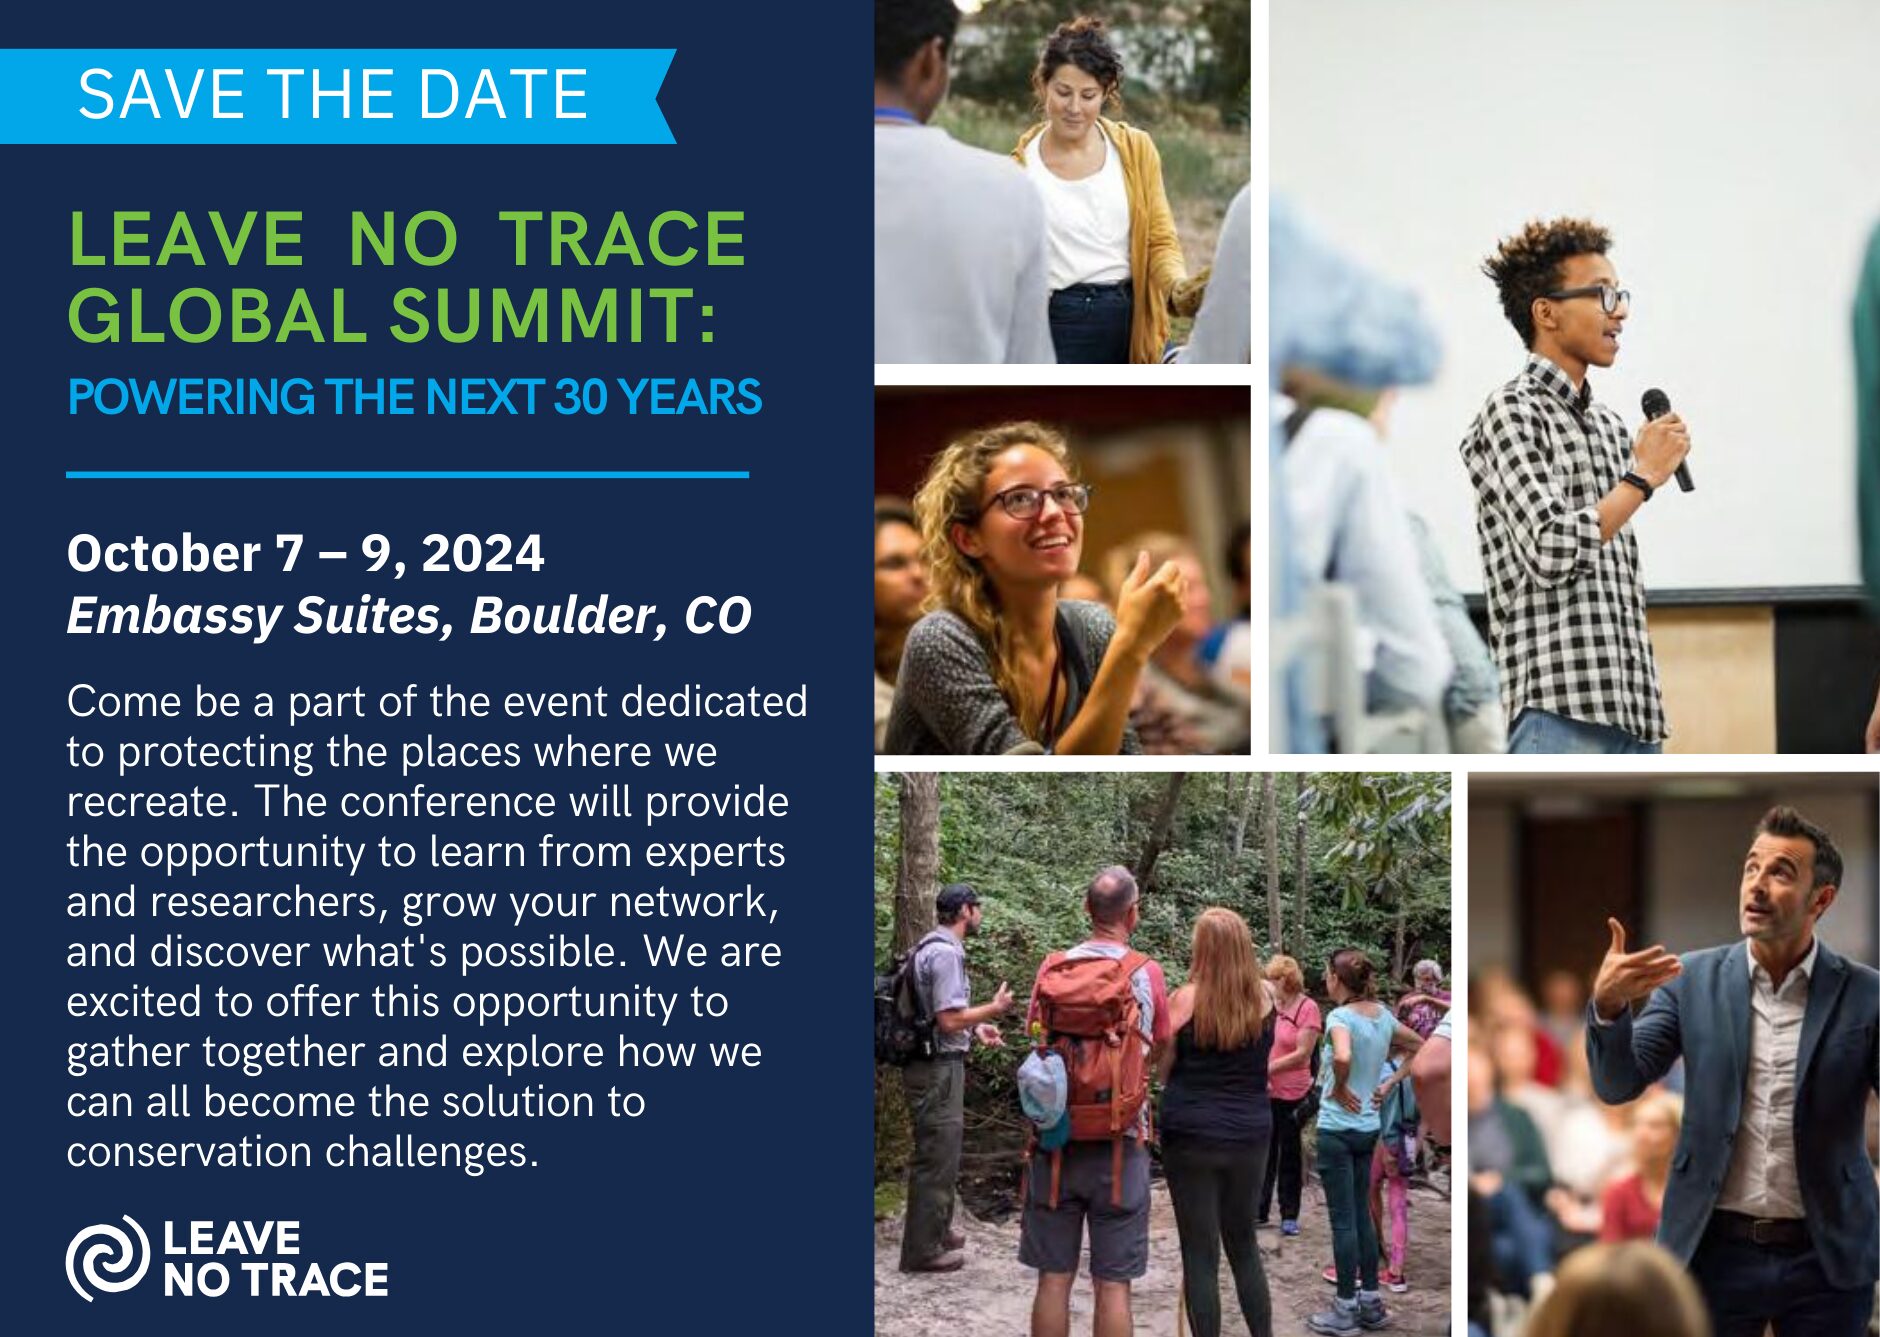 Save the date Oct. 7-9 for the Leave No Trace Golbal Summit